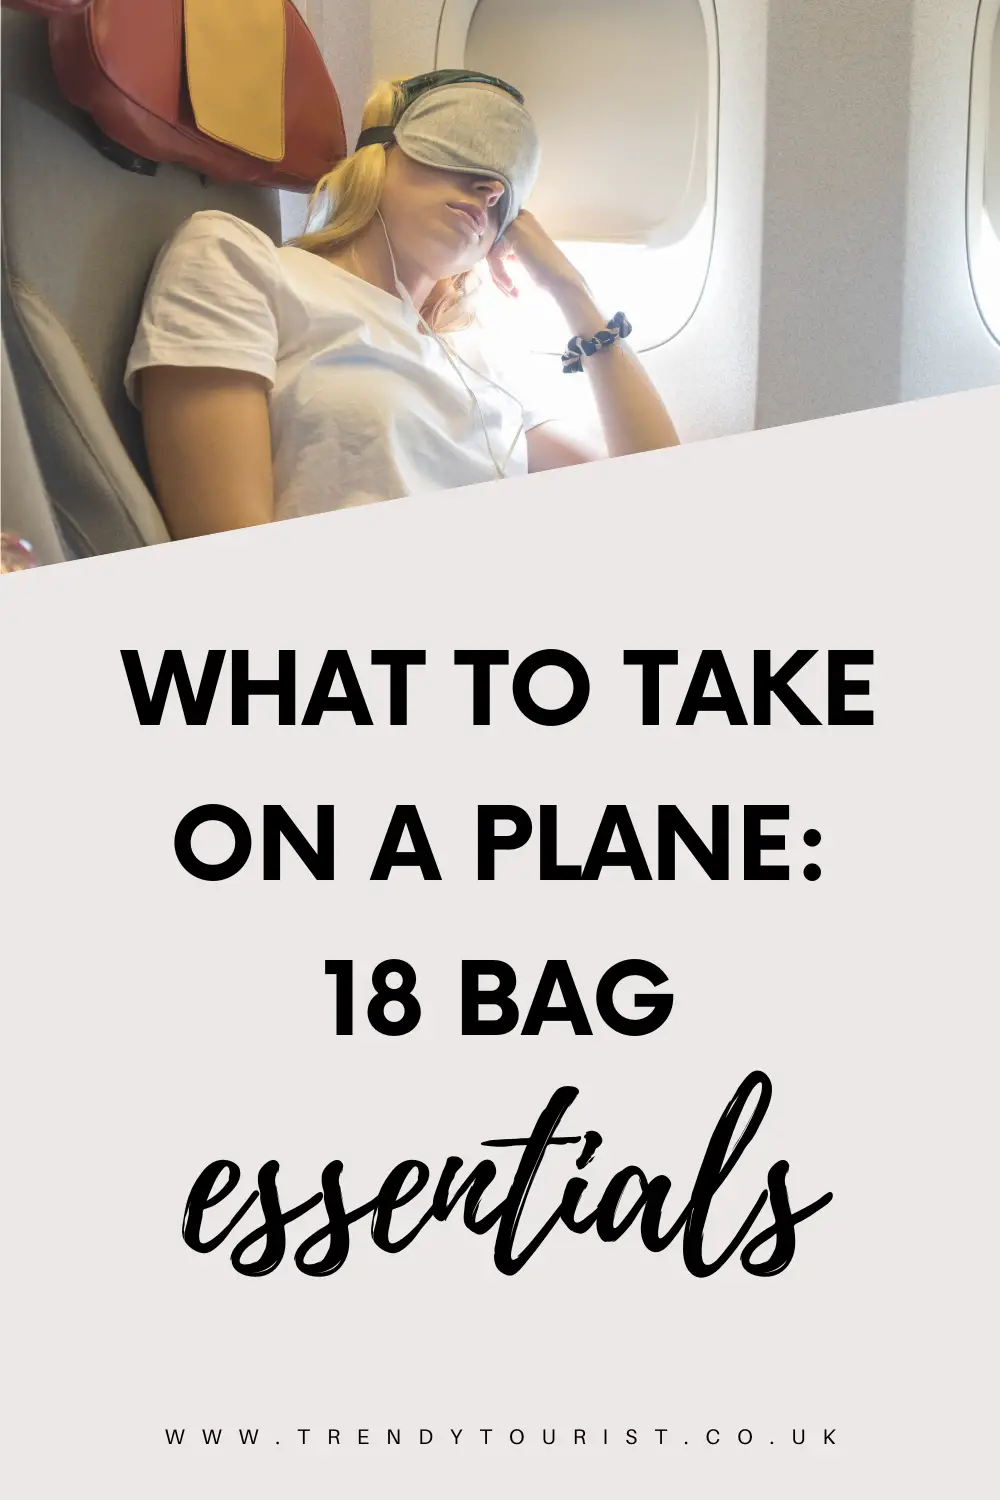 What to Take on a Plane: 18 Bag Essentials